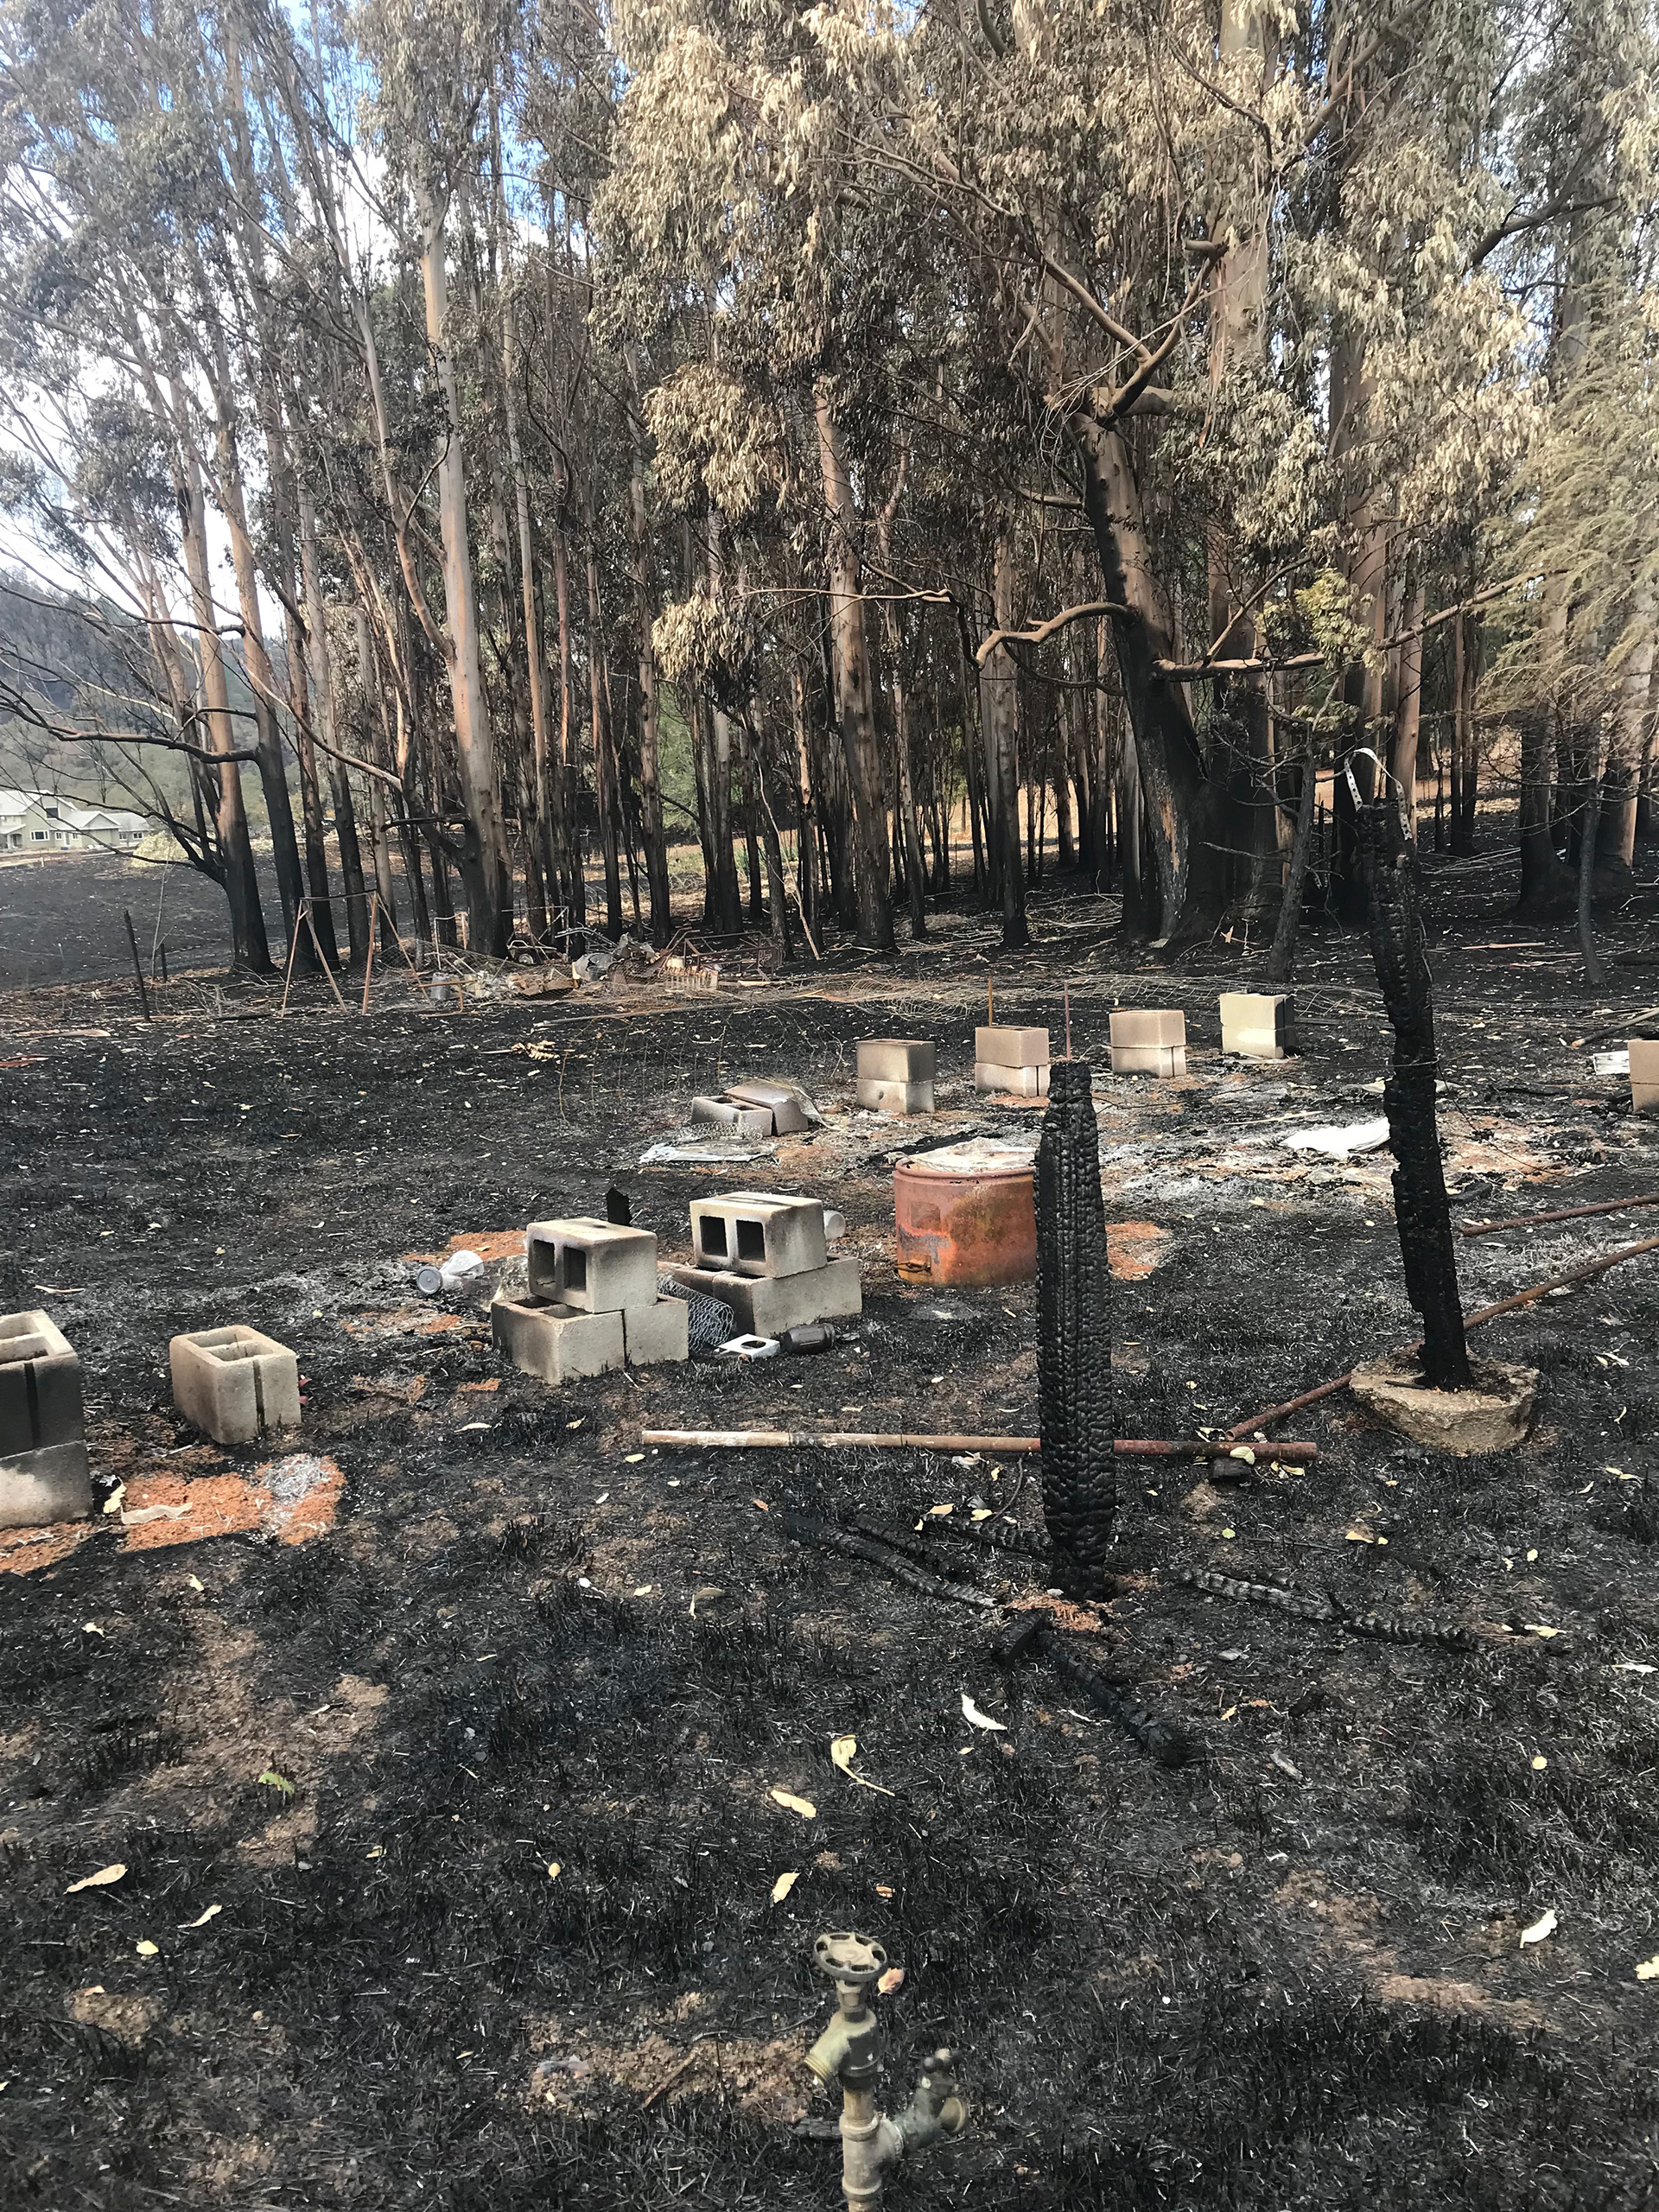 The post-fire remnants of Barker’s “pirate bee ships” on Suzy Fizell’s property in Santa Rosa.